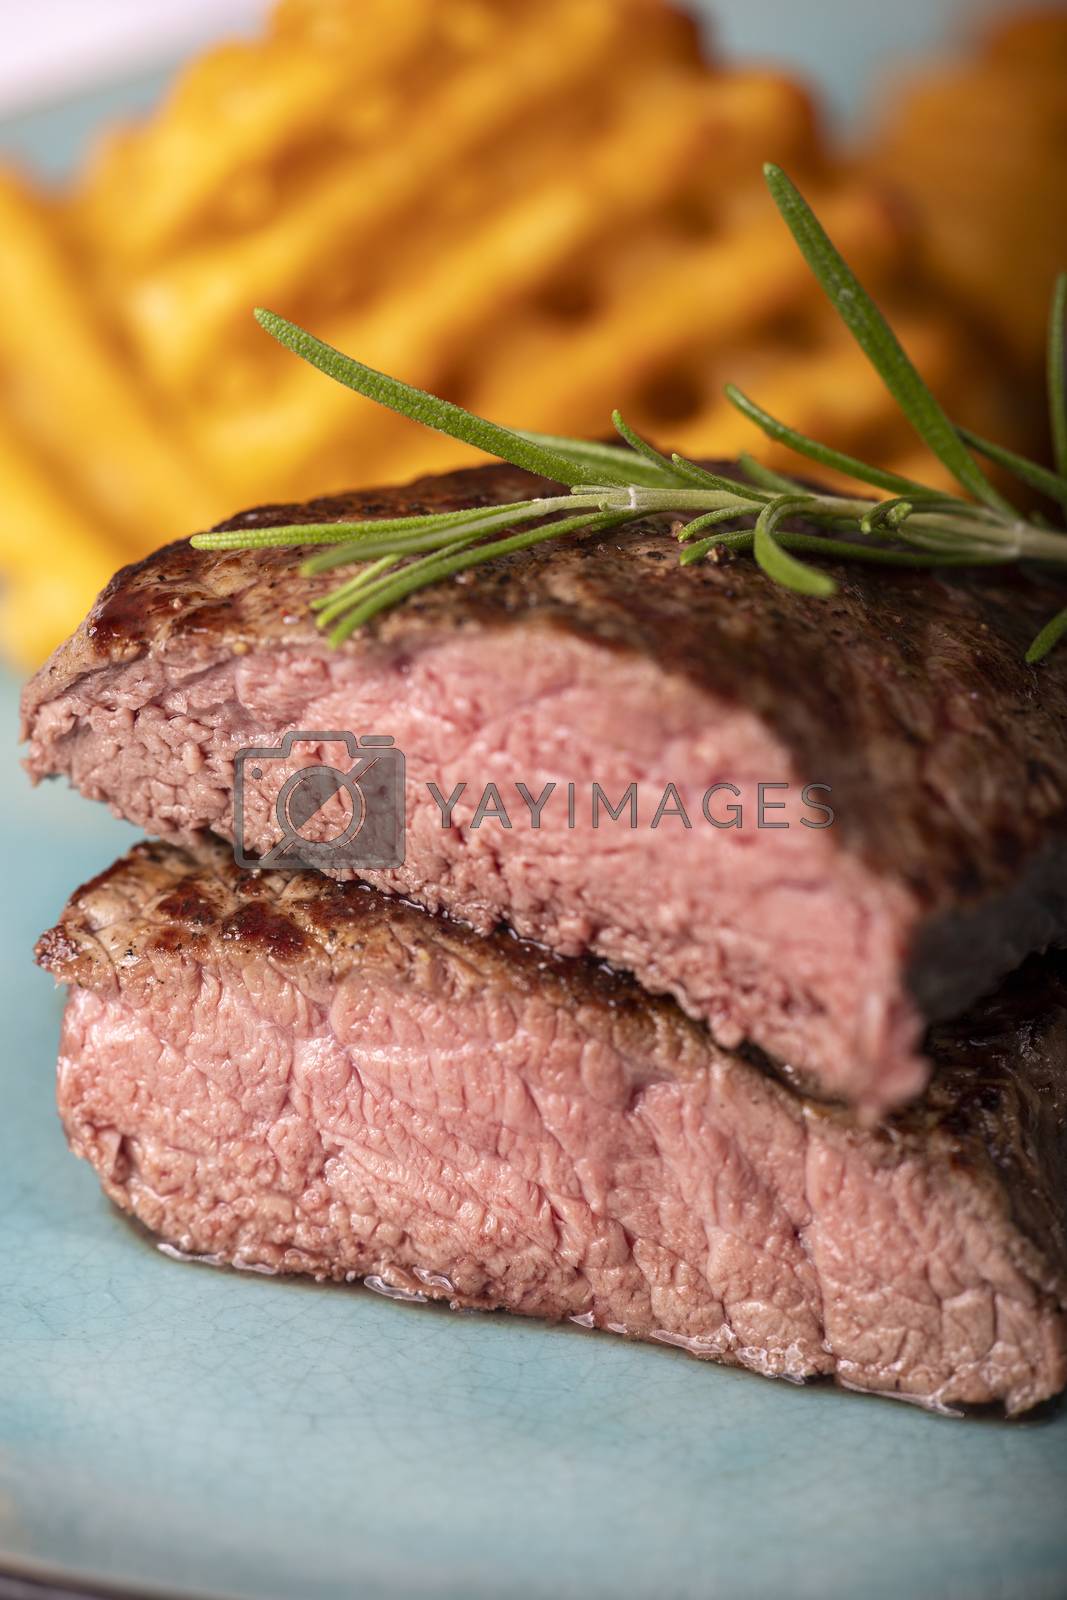 Royalty free image of steak with potato lattices by bernjuer